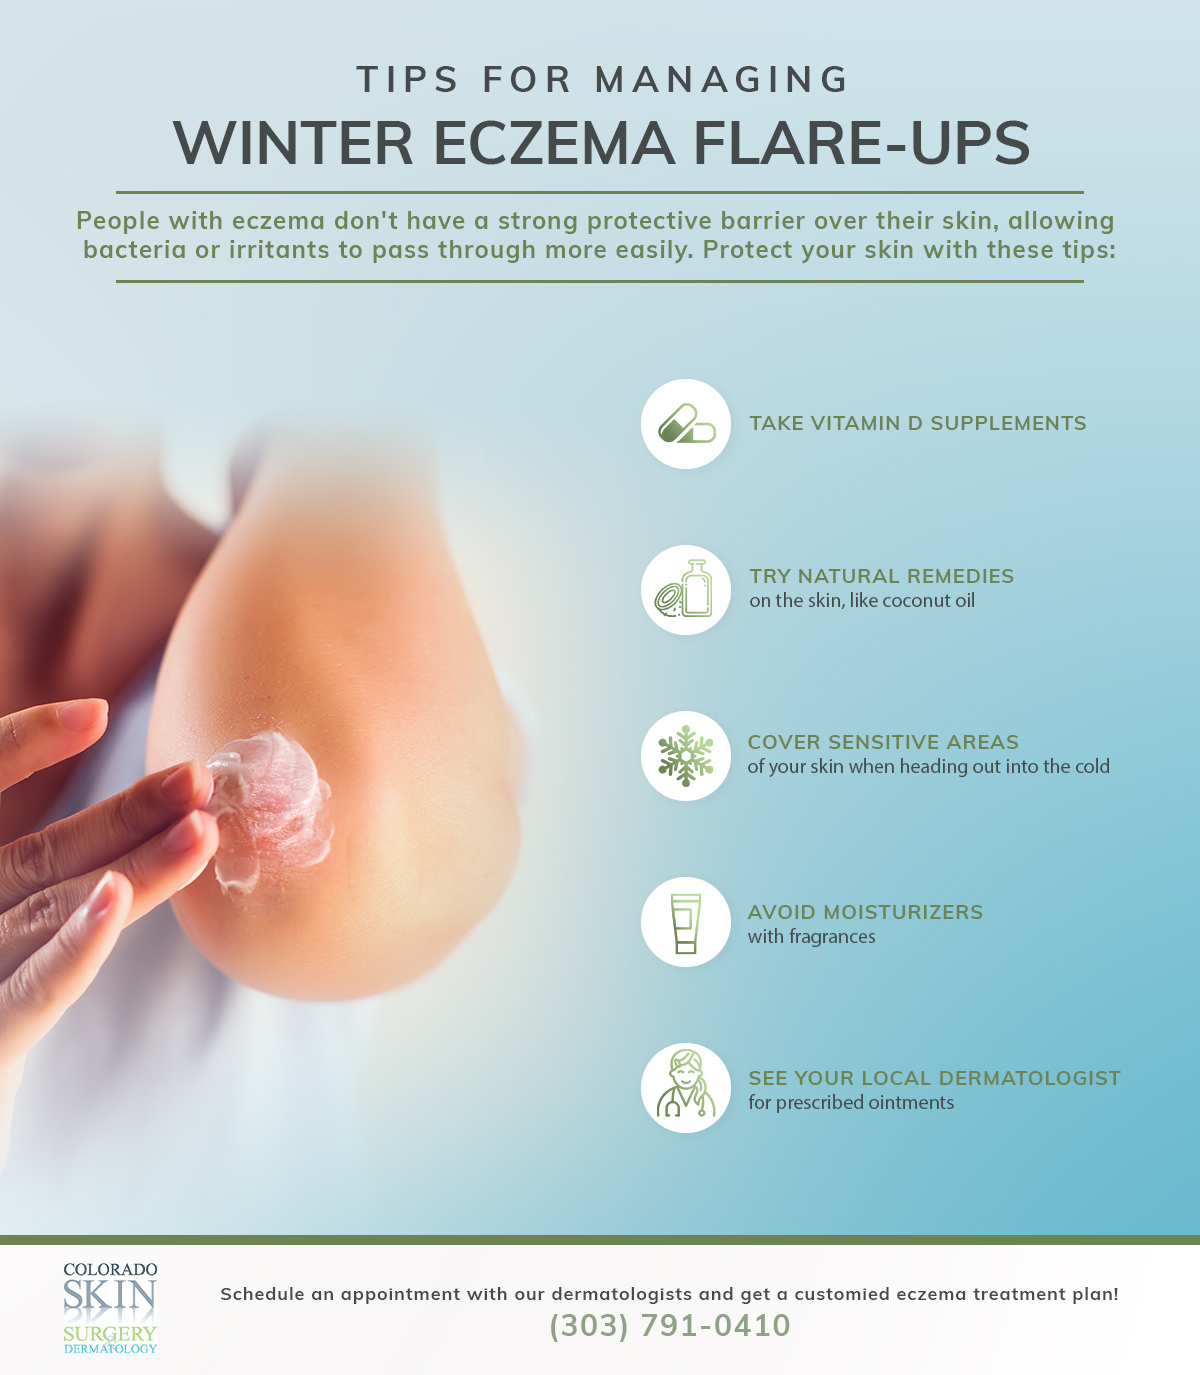 Dermatologists in Denver - Managing Eczema Flare-Ups During the Winter